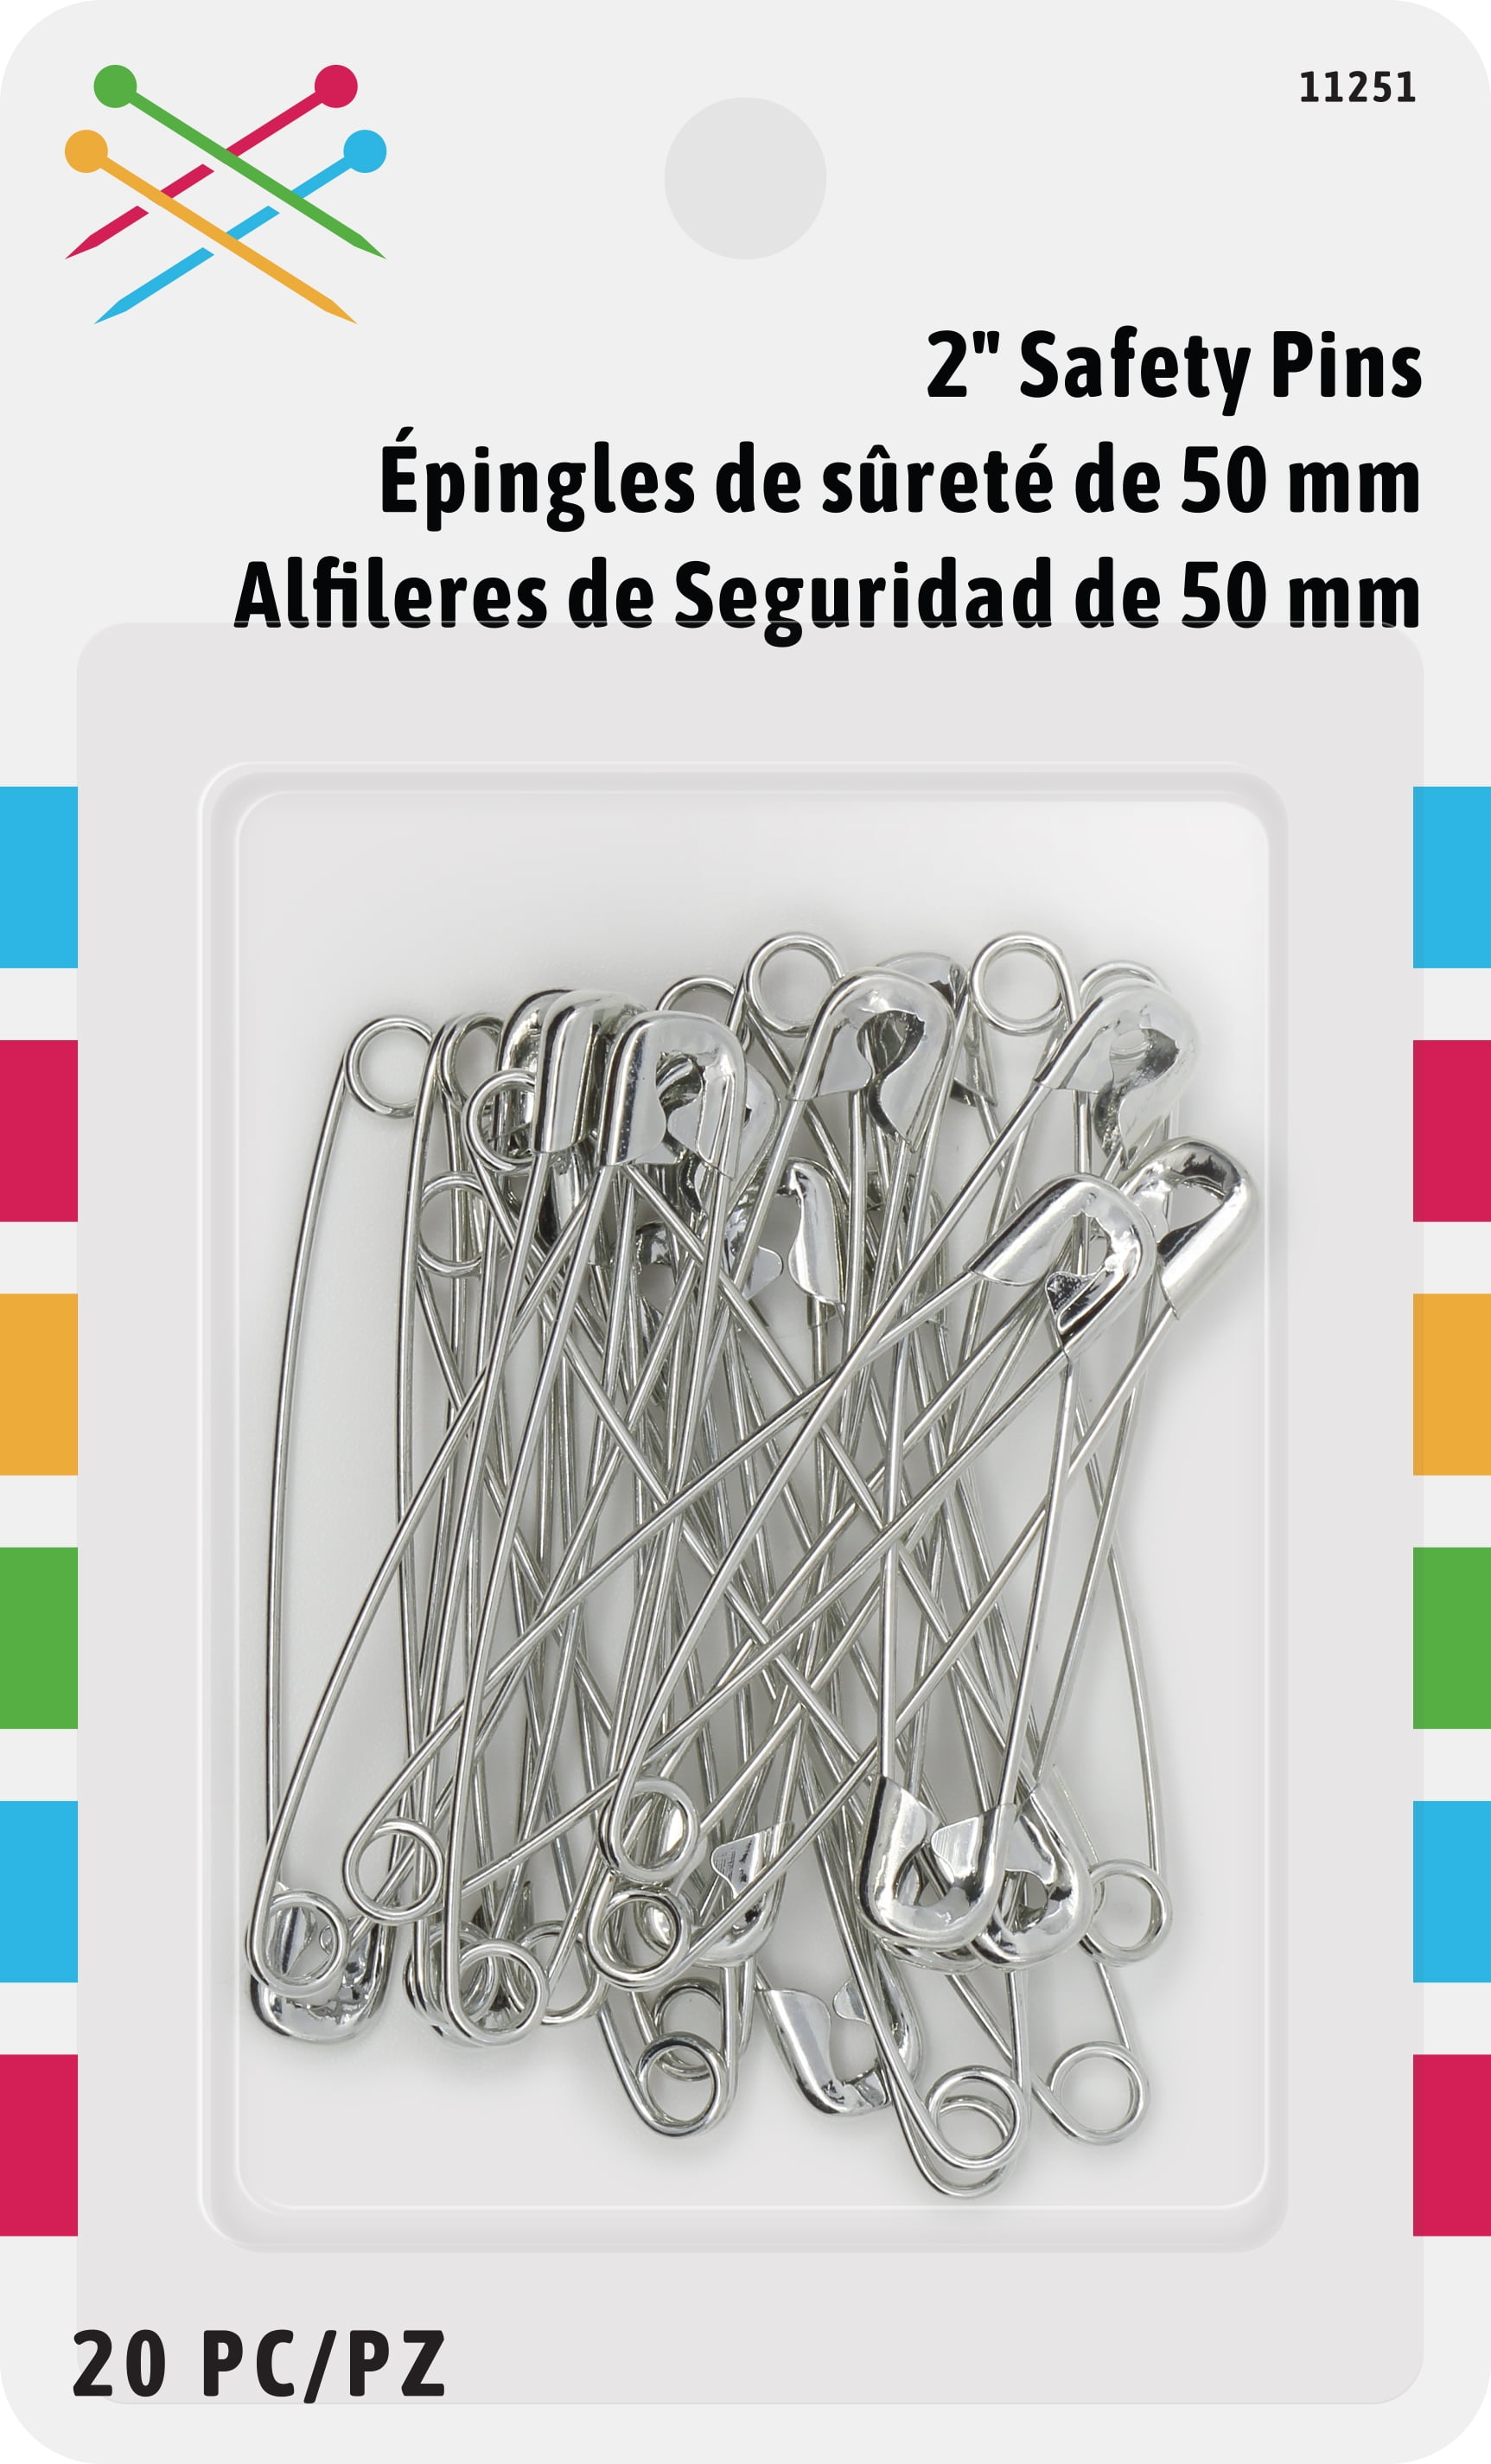 10 ct Heavy Duty 3½" Steel Blanket/Laundry Safety Pins 